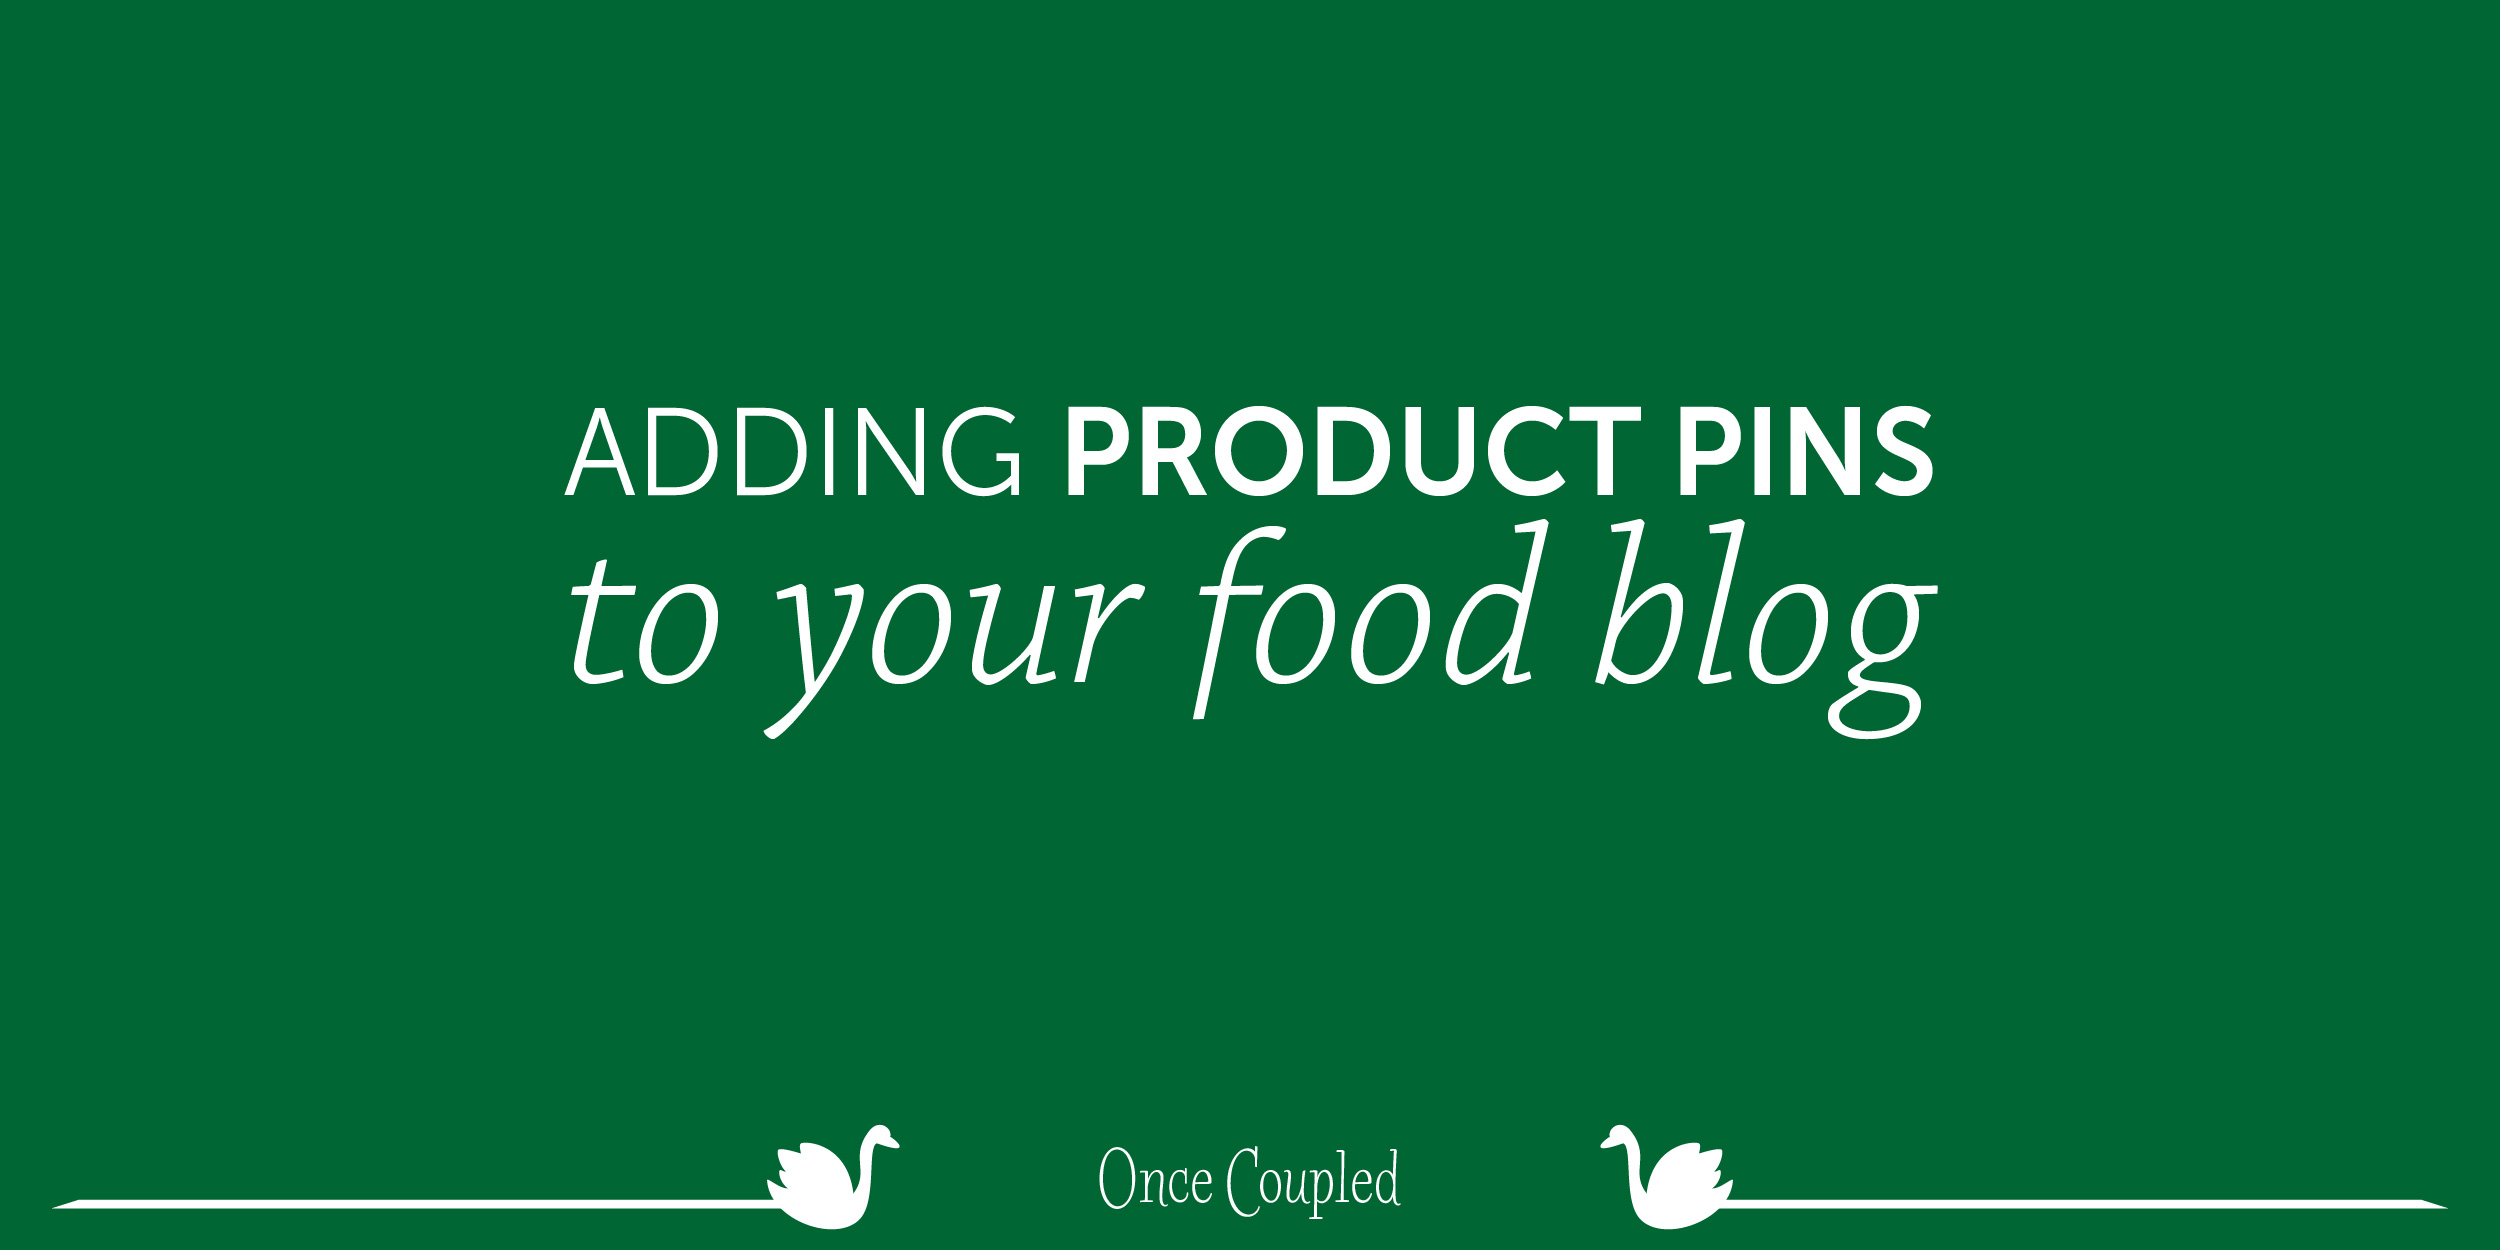 Adding Rich Product Pins to Your Food Blog